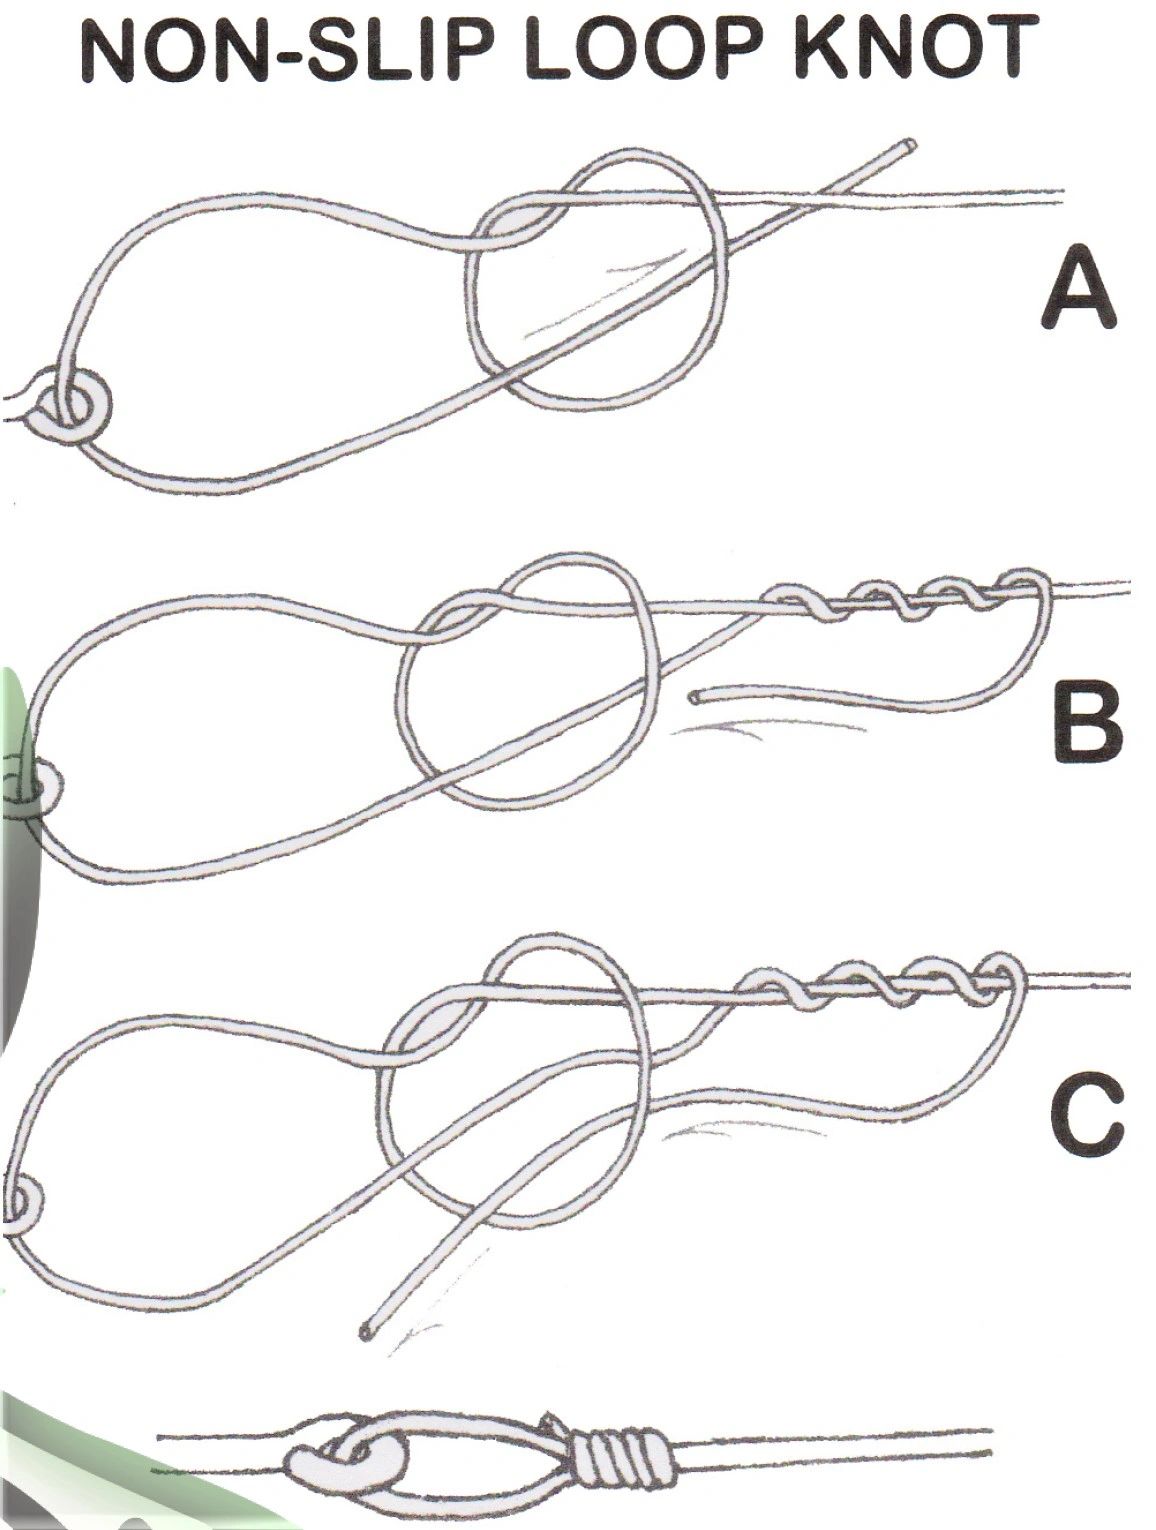 How Many Turns Do You Use On Your Non-Slip Loop Knot?